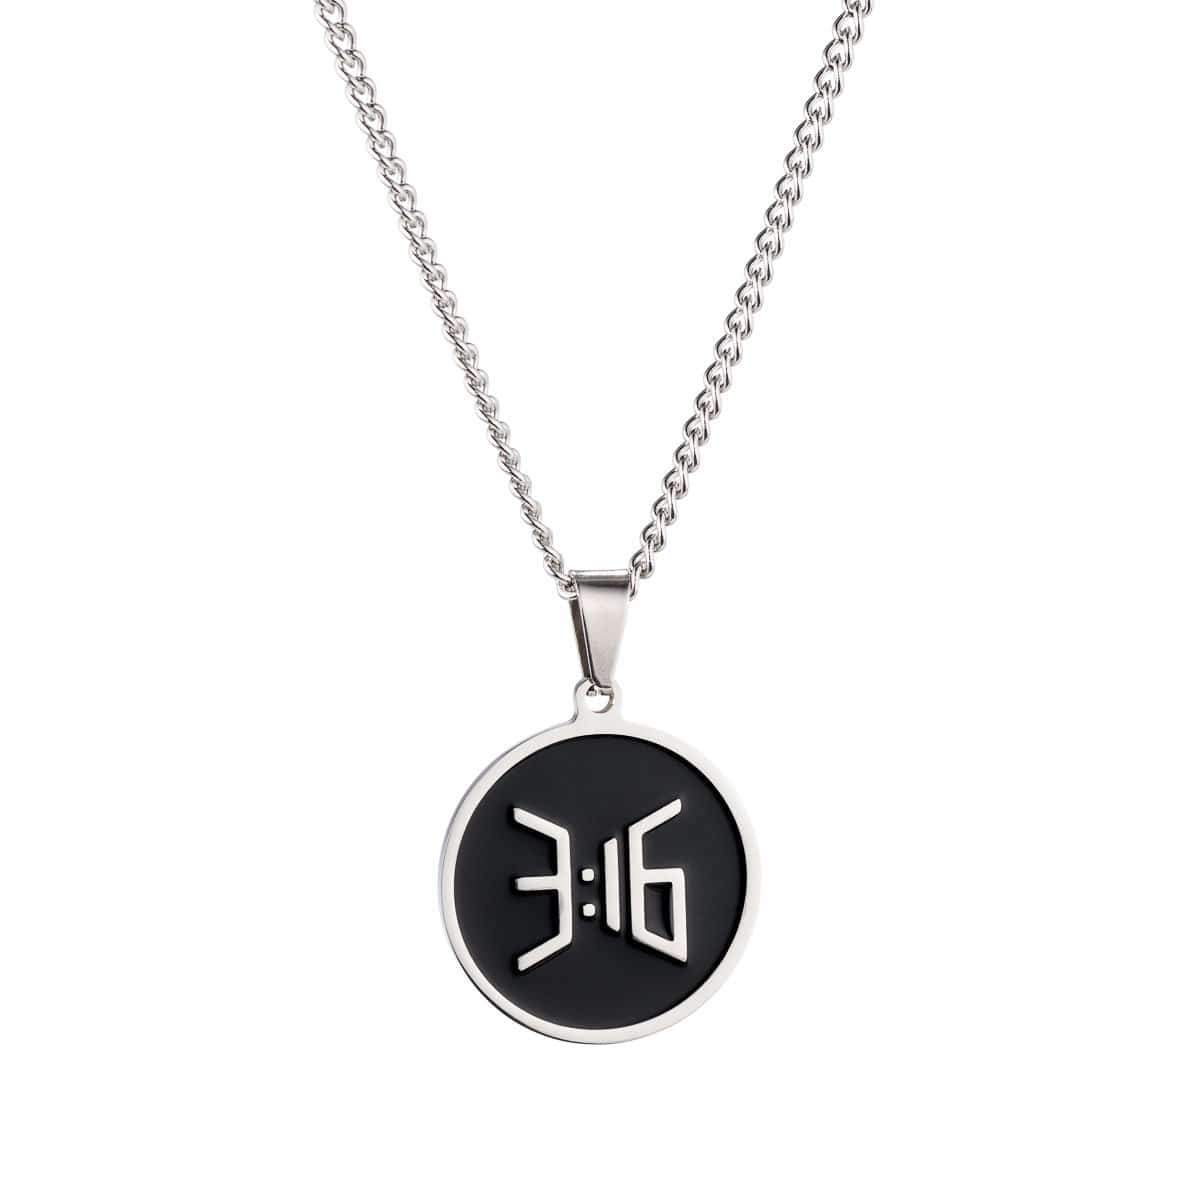 316collection Jewelry 3:16 Pendant Necklace